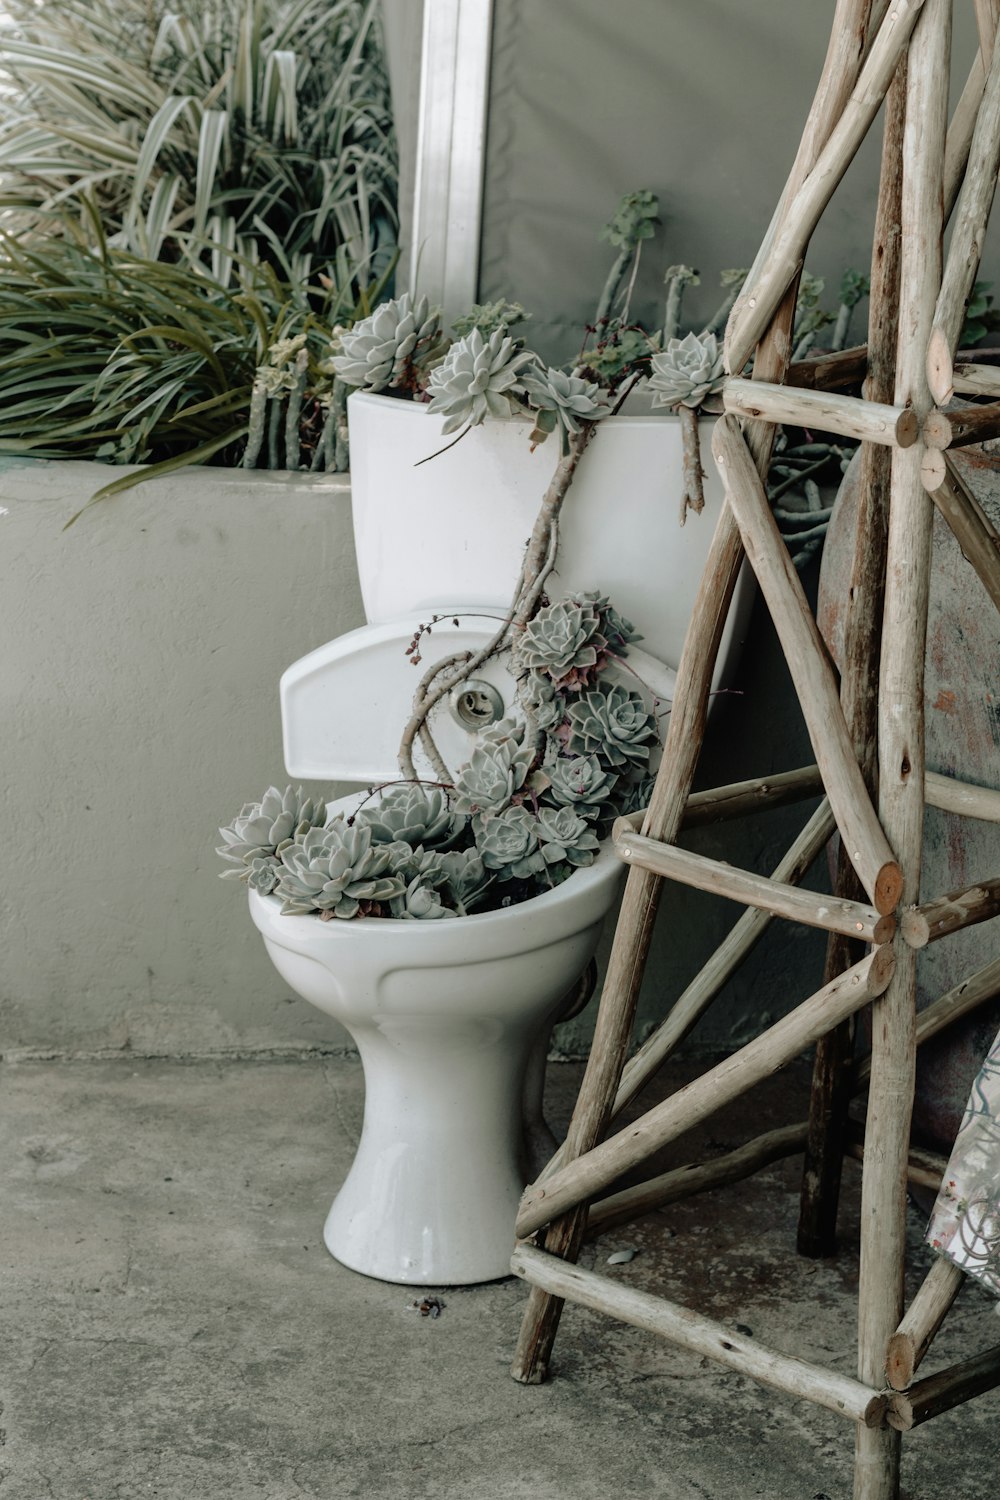 green succulent plants in white toilet bowl